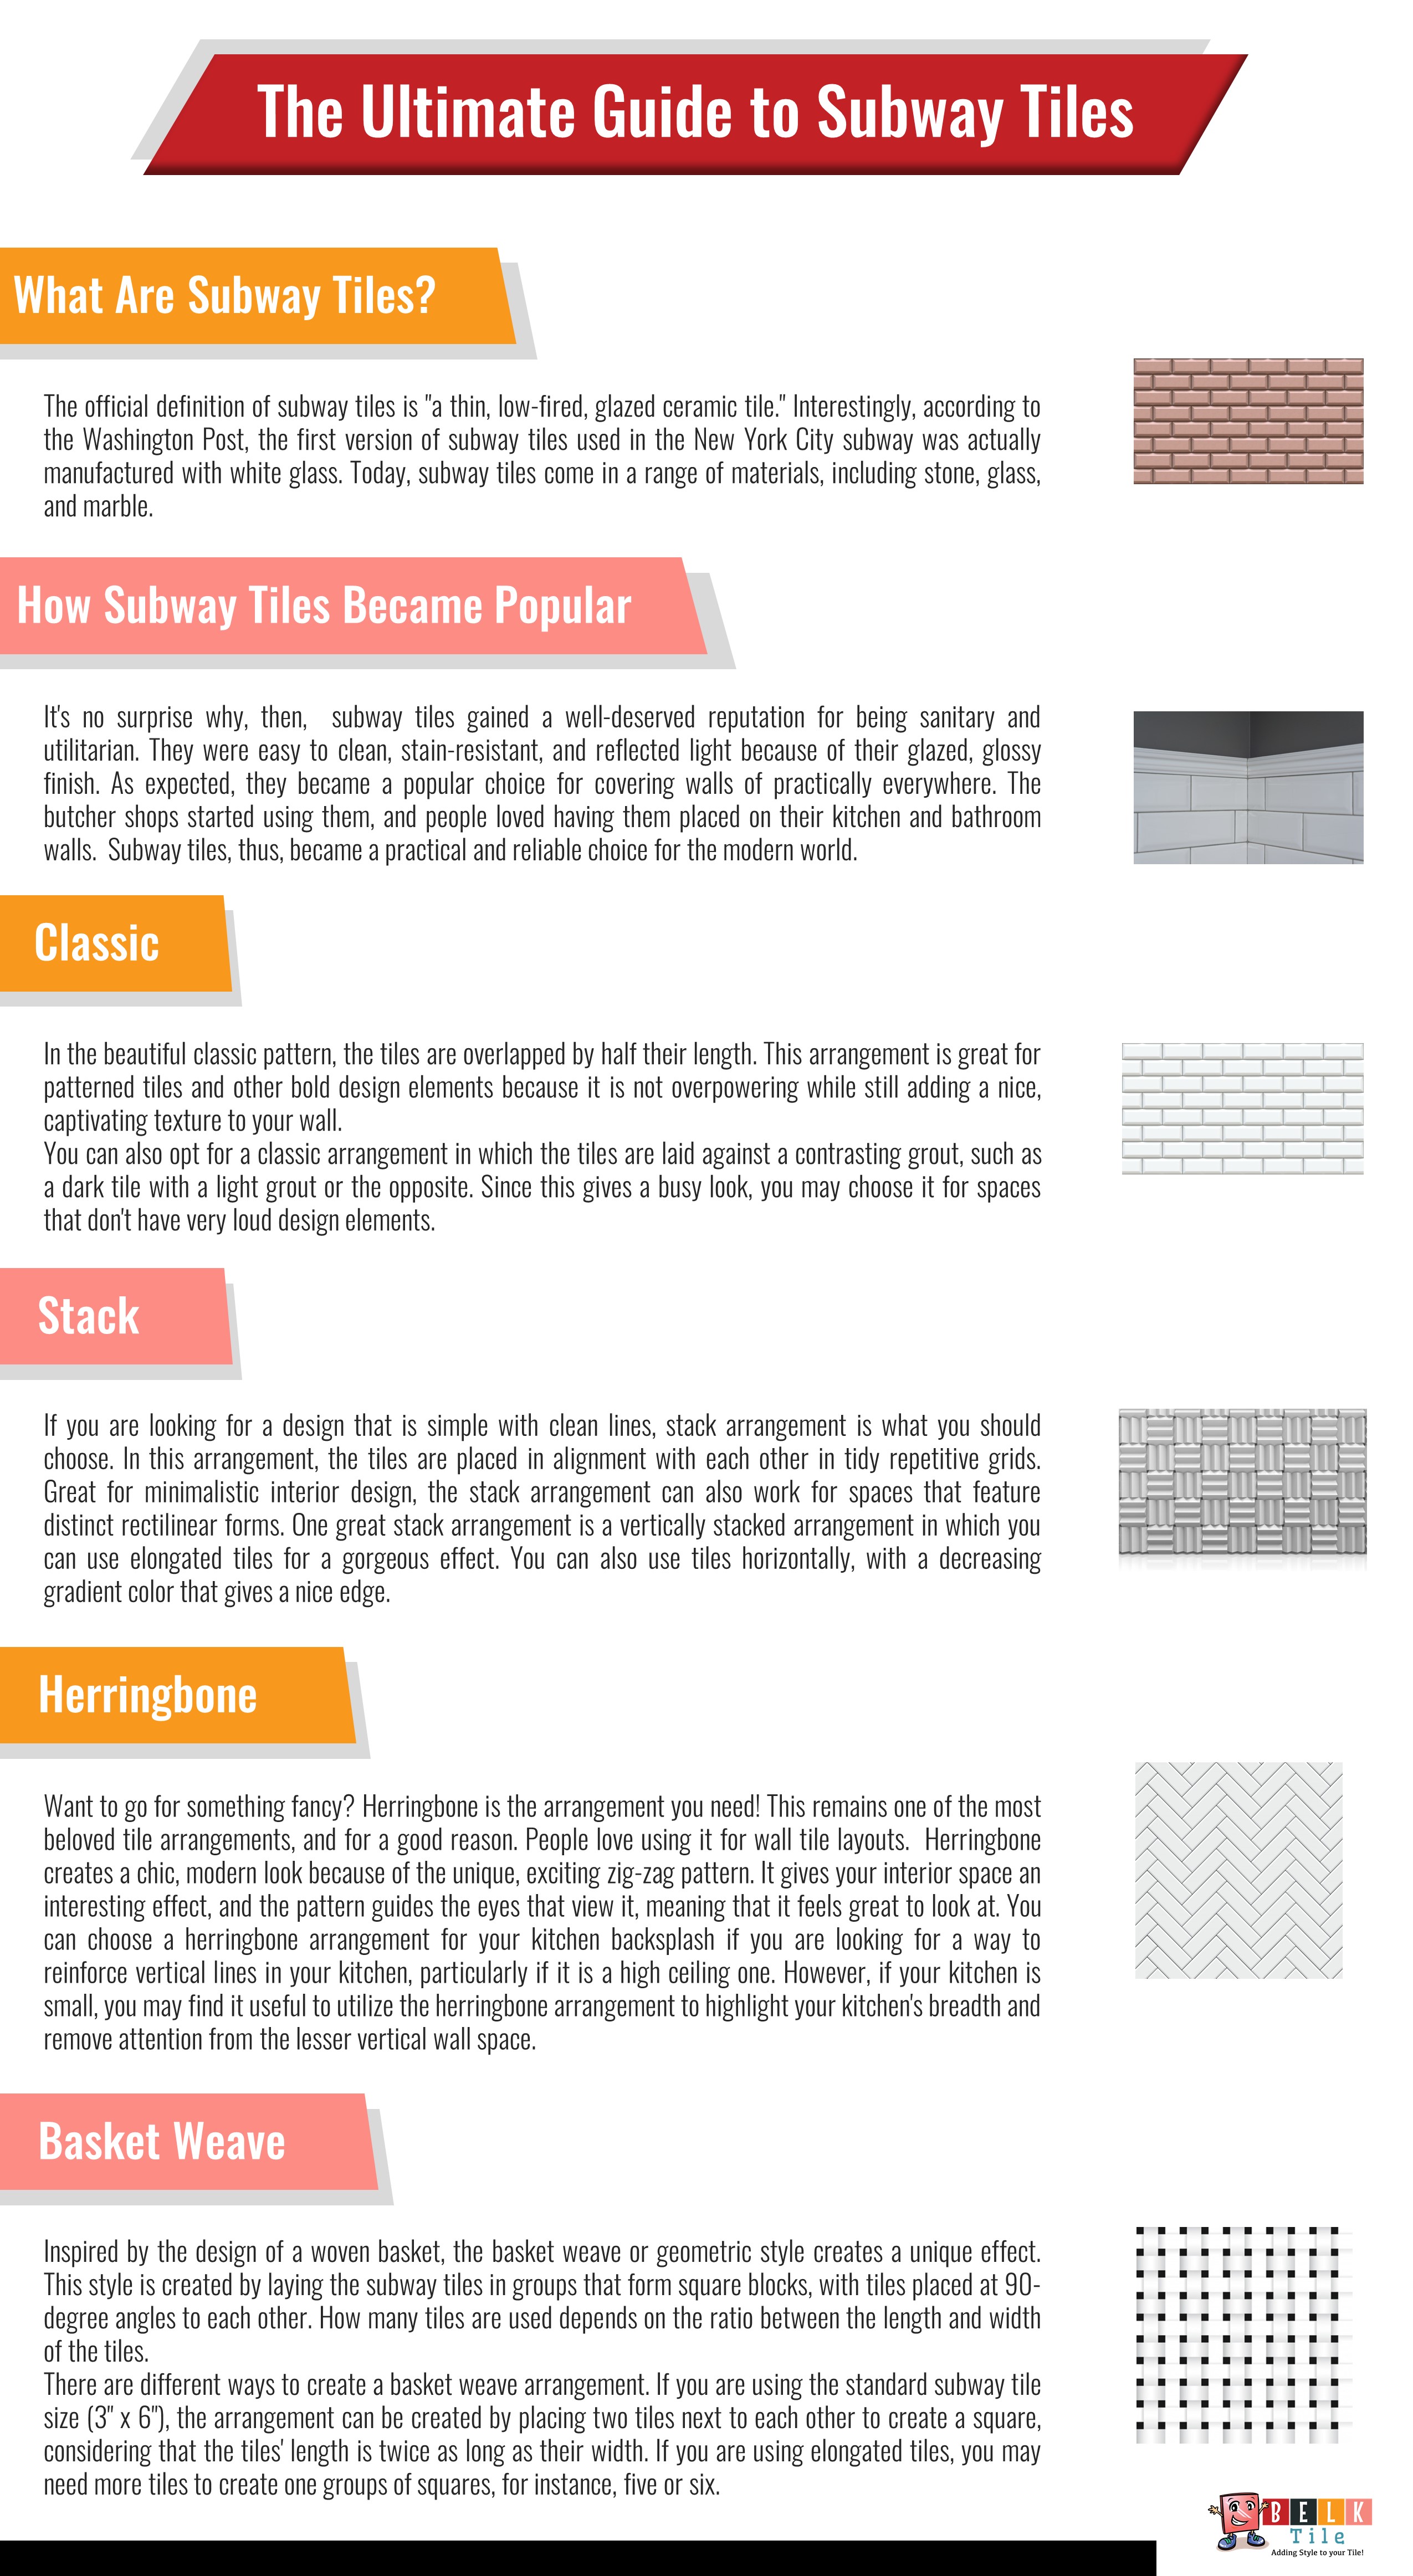 Ultimate Guide to Subway Tiles Infographic at BELK Tile